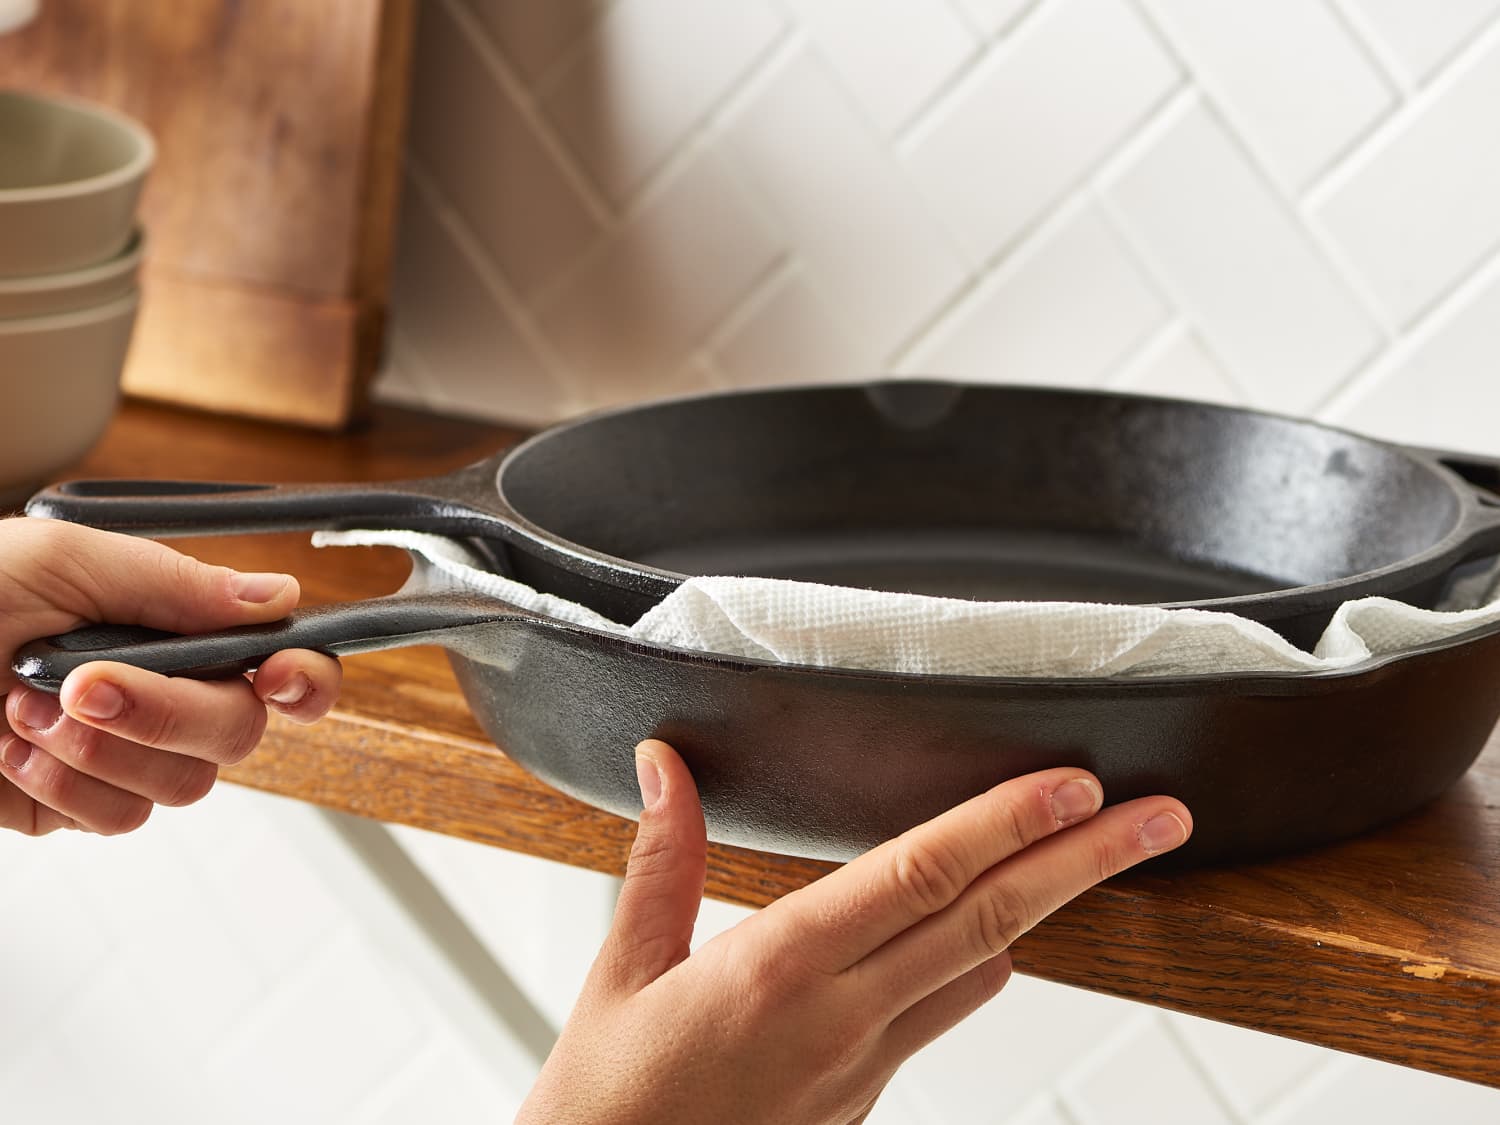 how or where do you store your cast iron? rack ideas (cooking